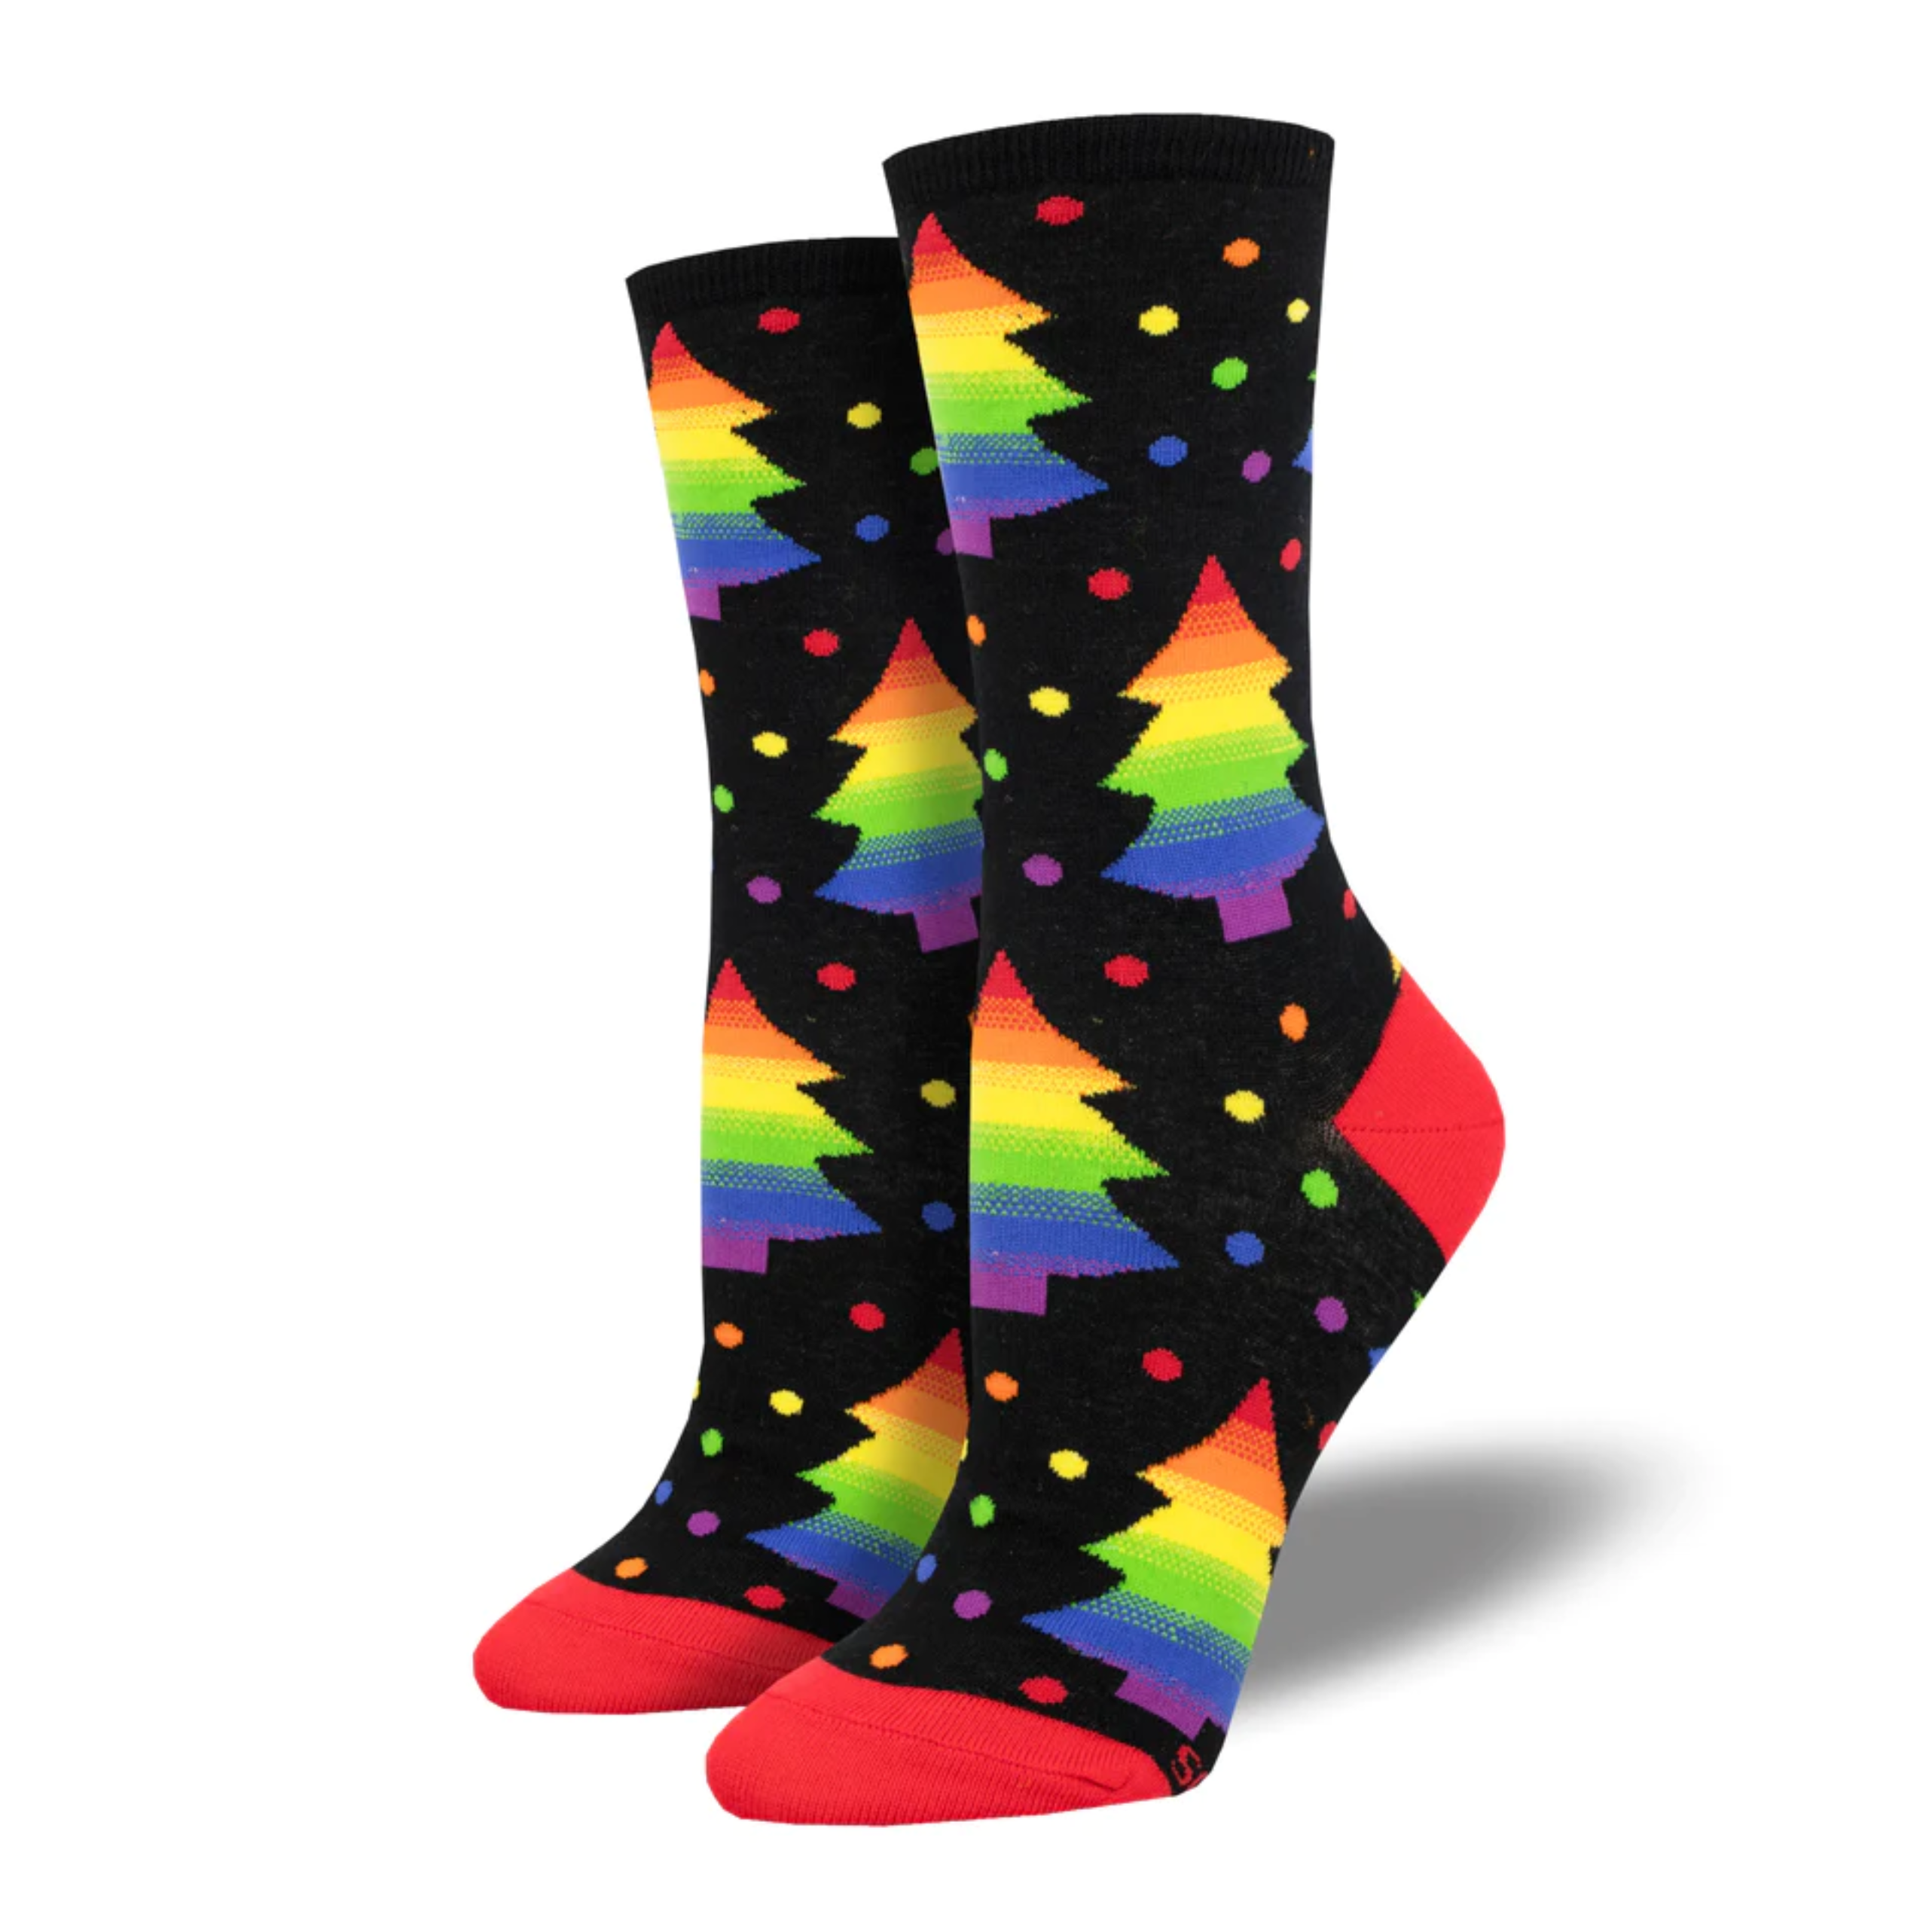 11 Novelty Socks You Can Buy In Toronto If You're All Out Of Holiday Gift  Ideas - Narcity